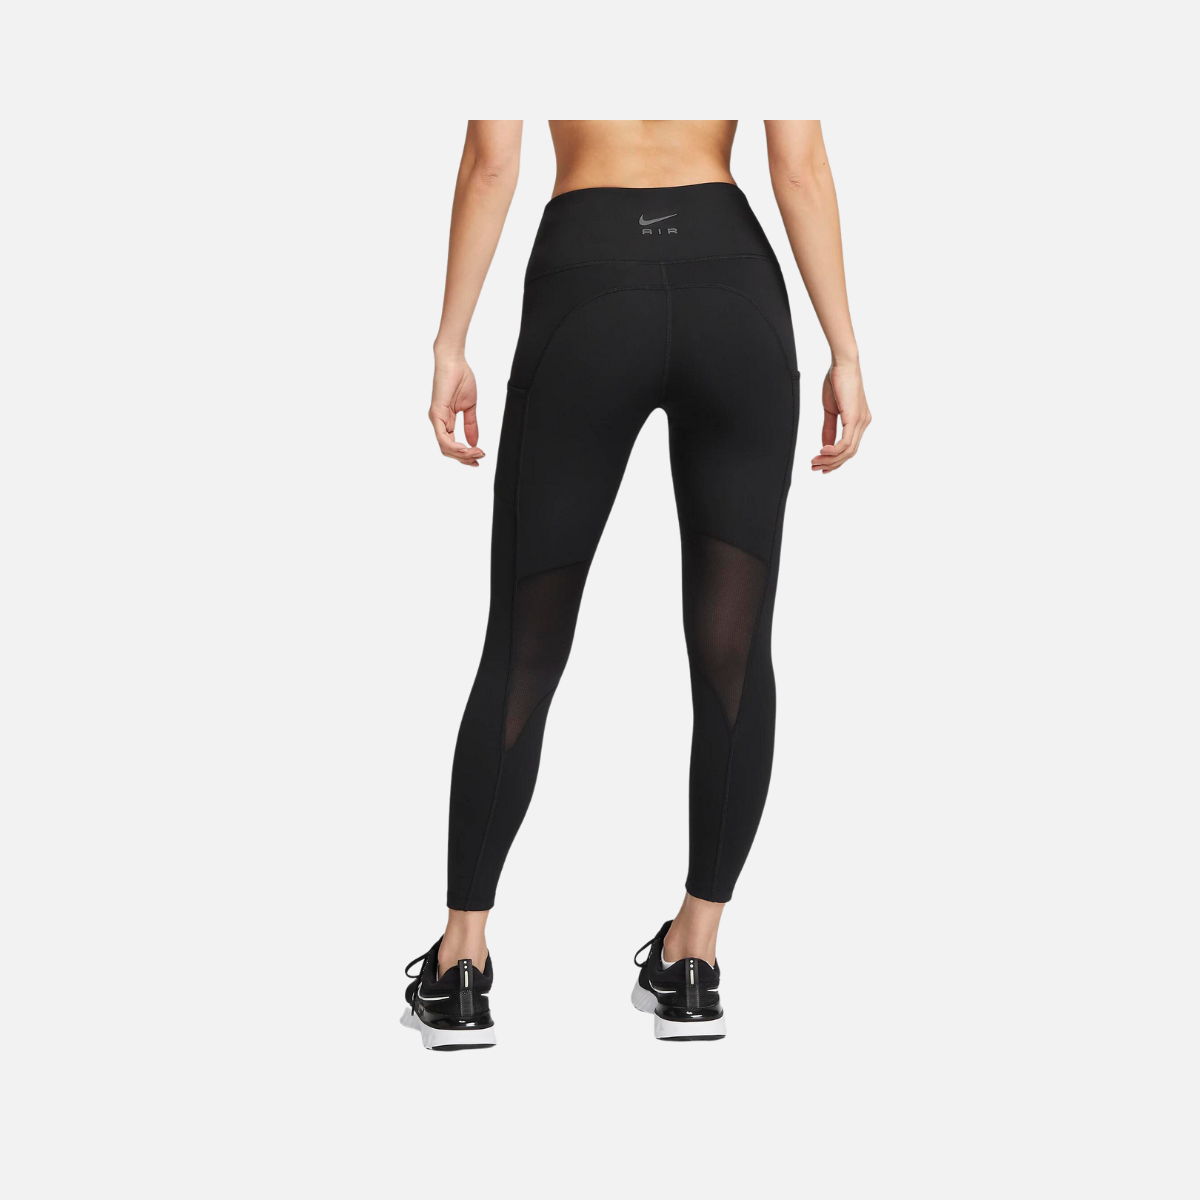 Nike Womens Fast Mid-Rise Tights - BLACK/REFLECTIVE SILVER, Sportsmart